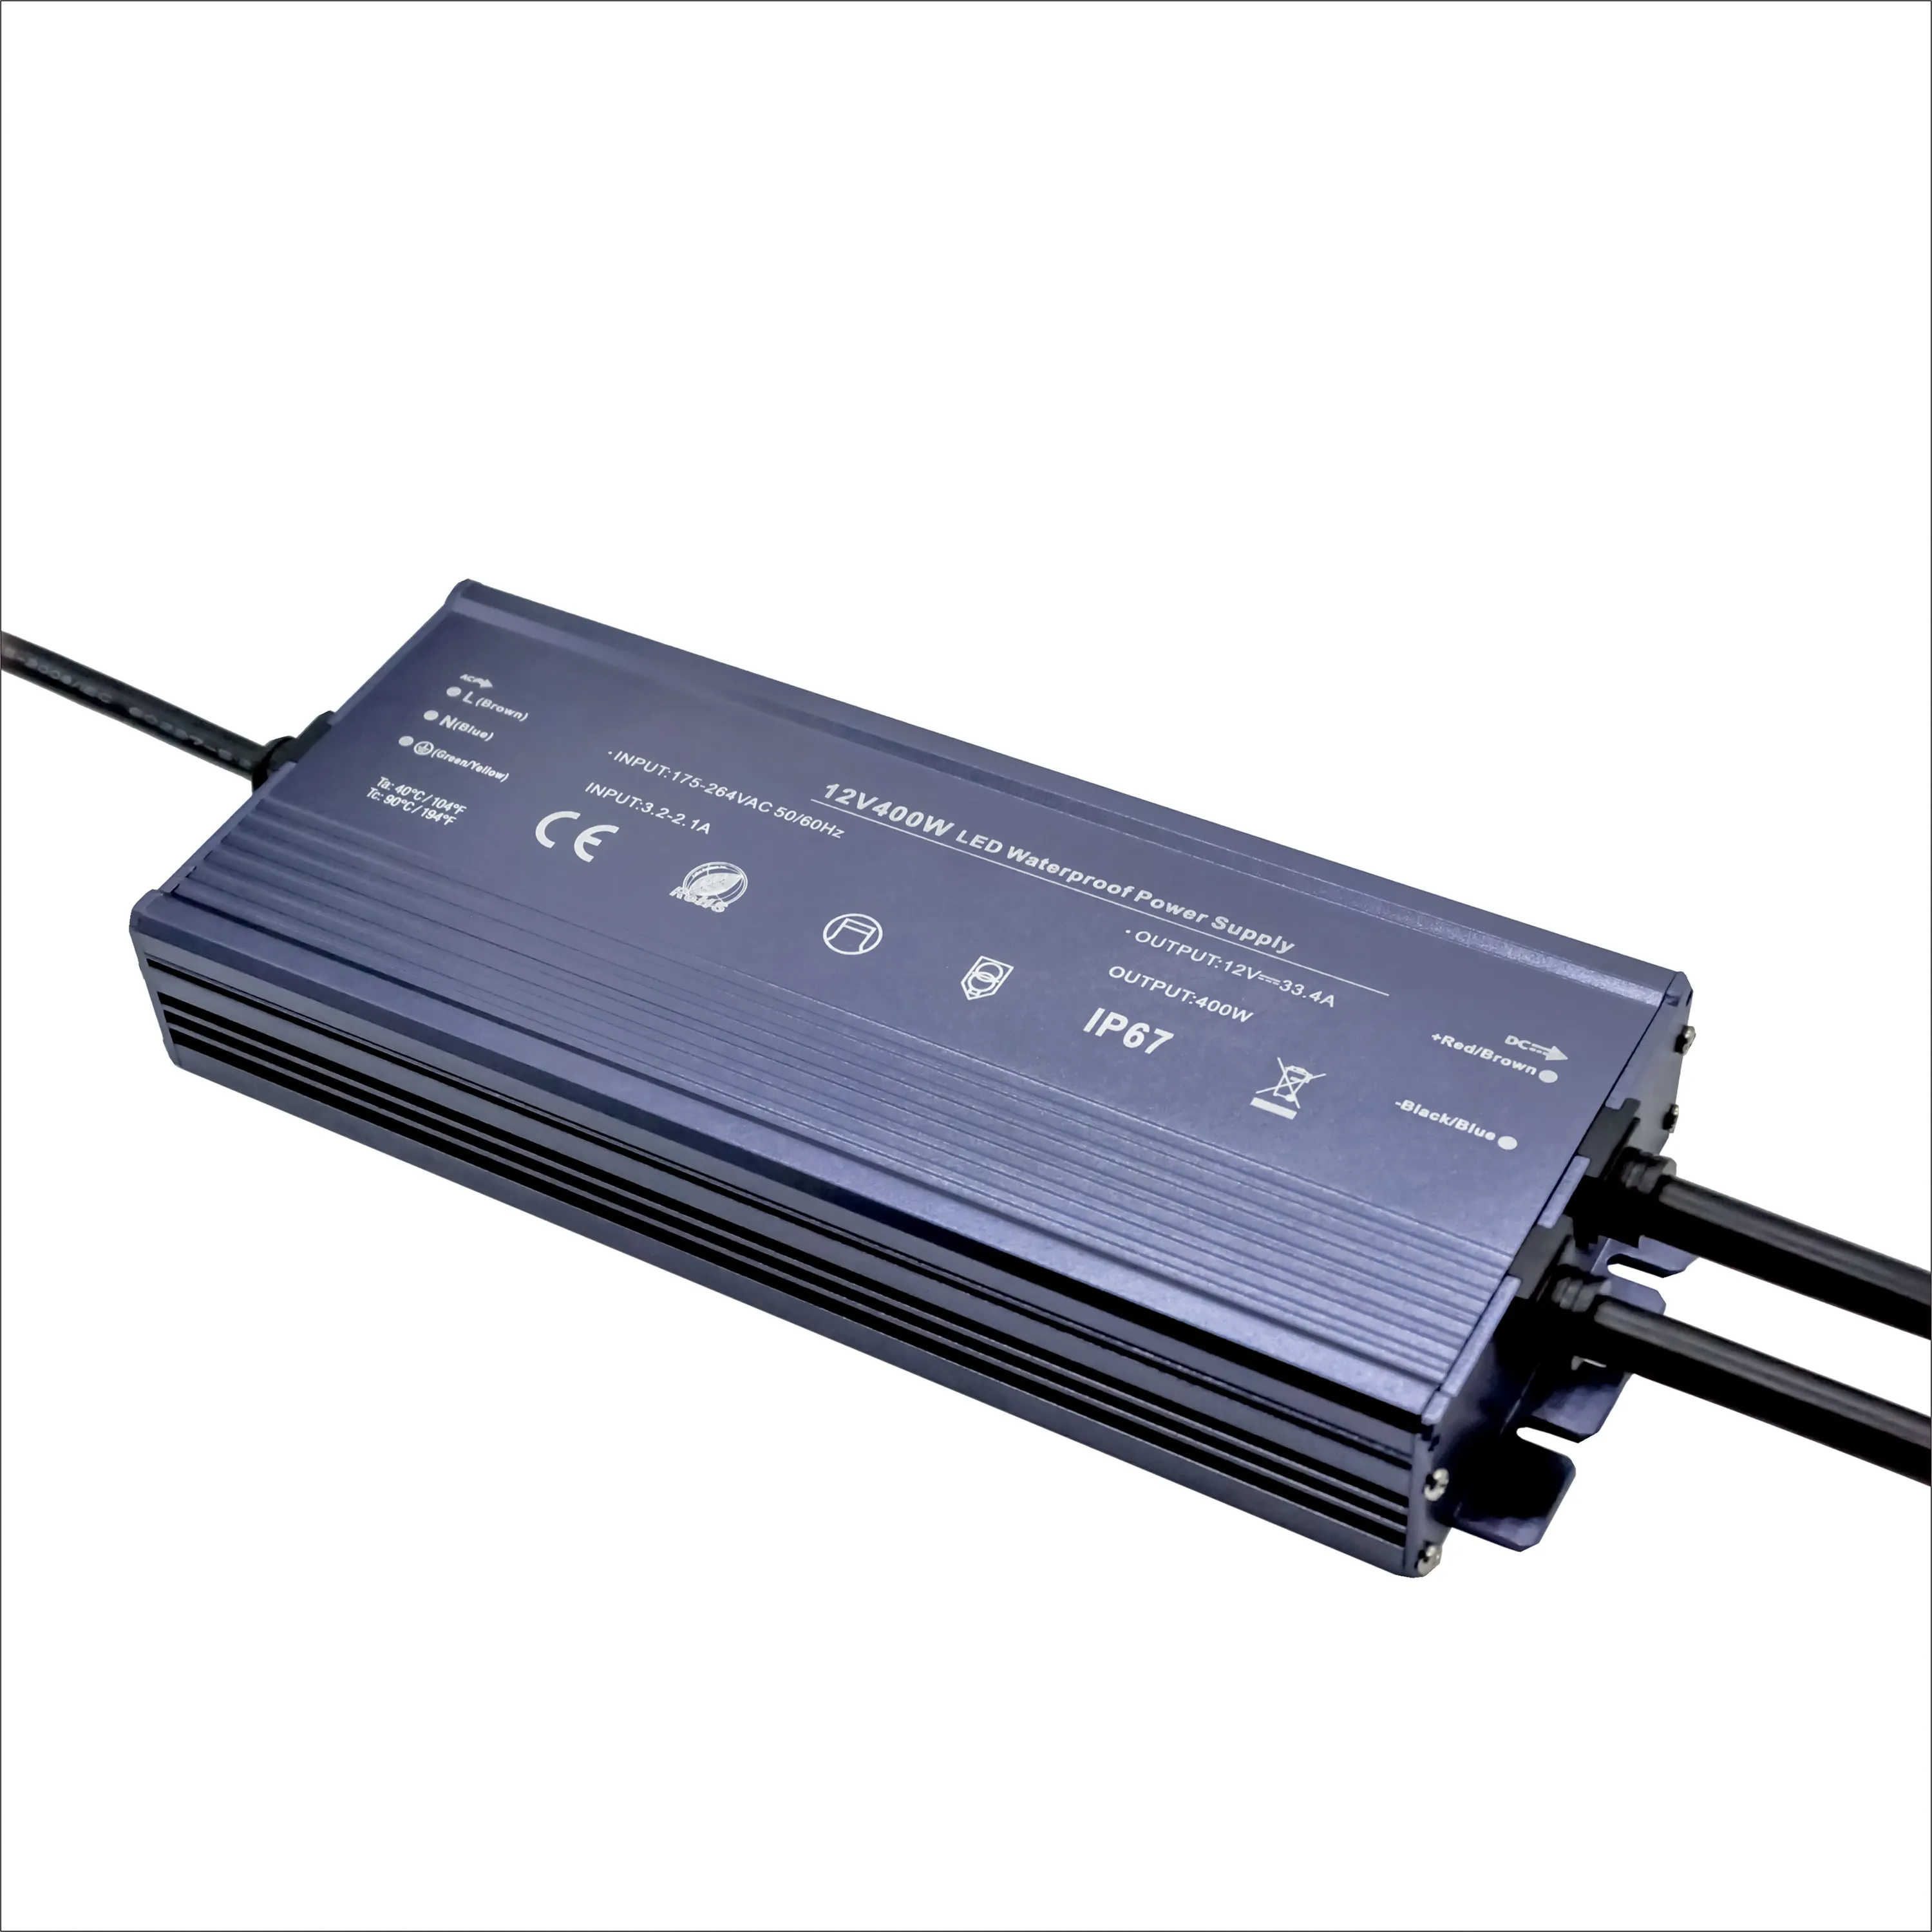 Smps 24V 10A Pwm Dimmable Led Driver Emc 500W Alimentation Courant Constant 12V 60W Inventronics Neon Alimentation